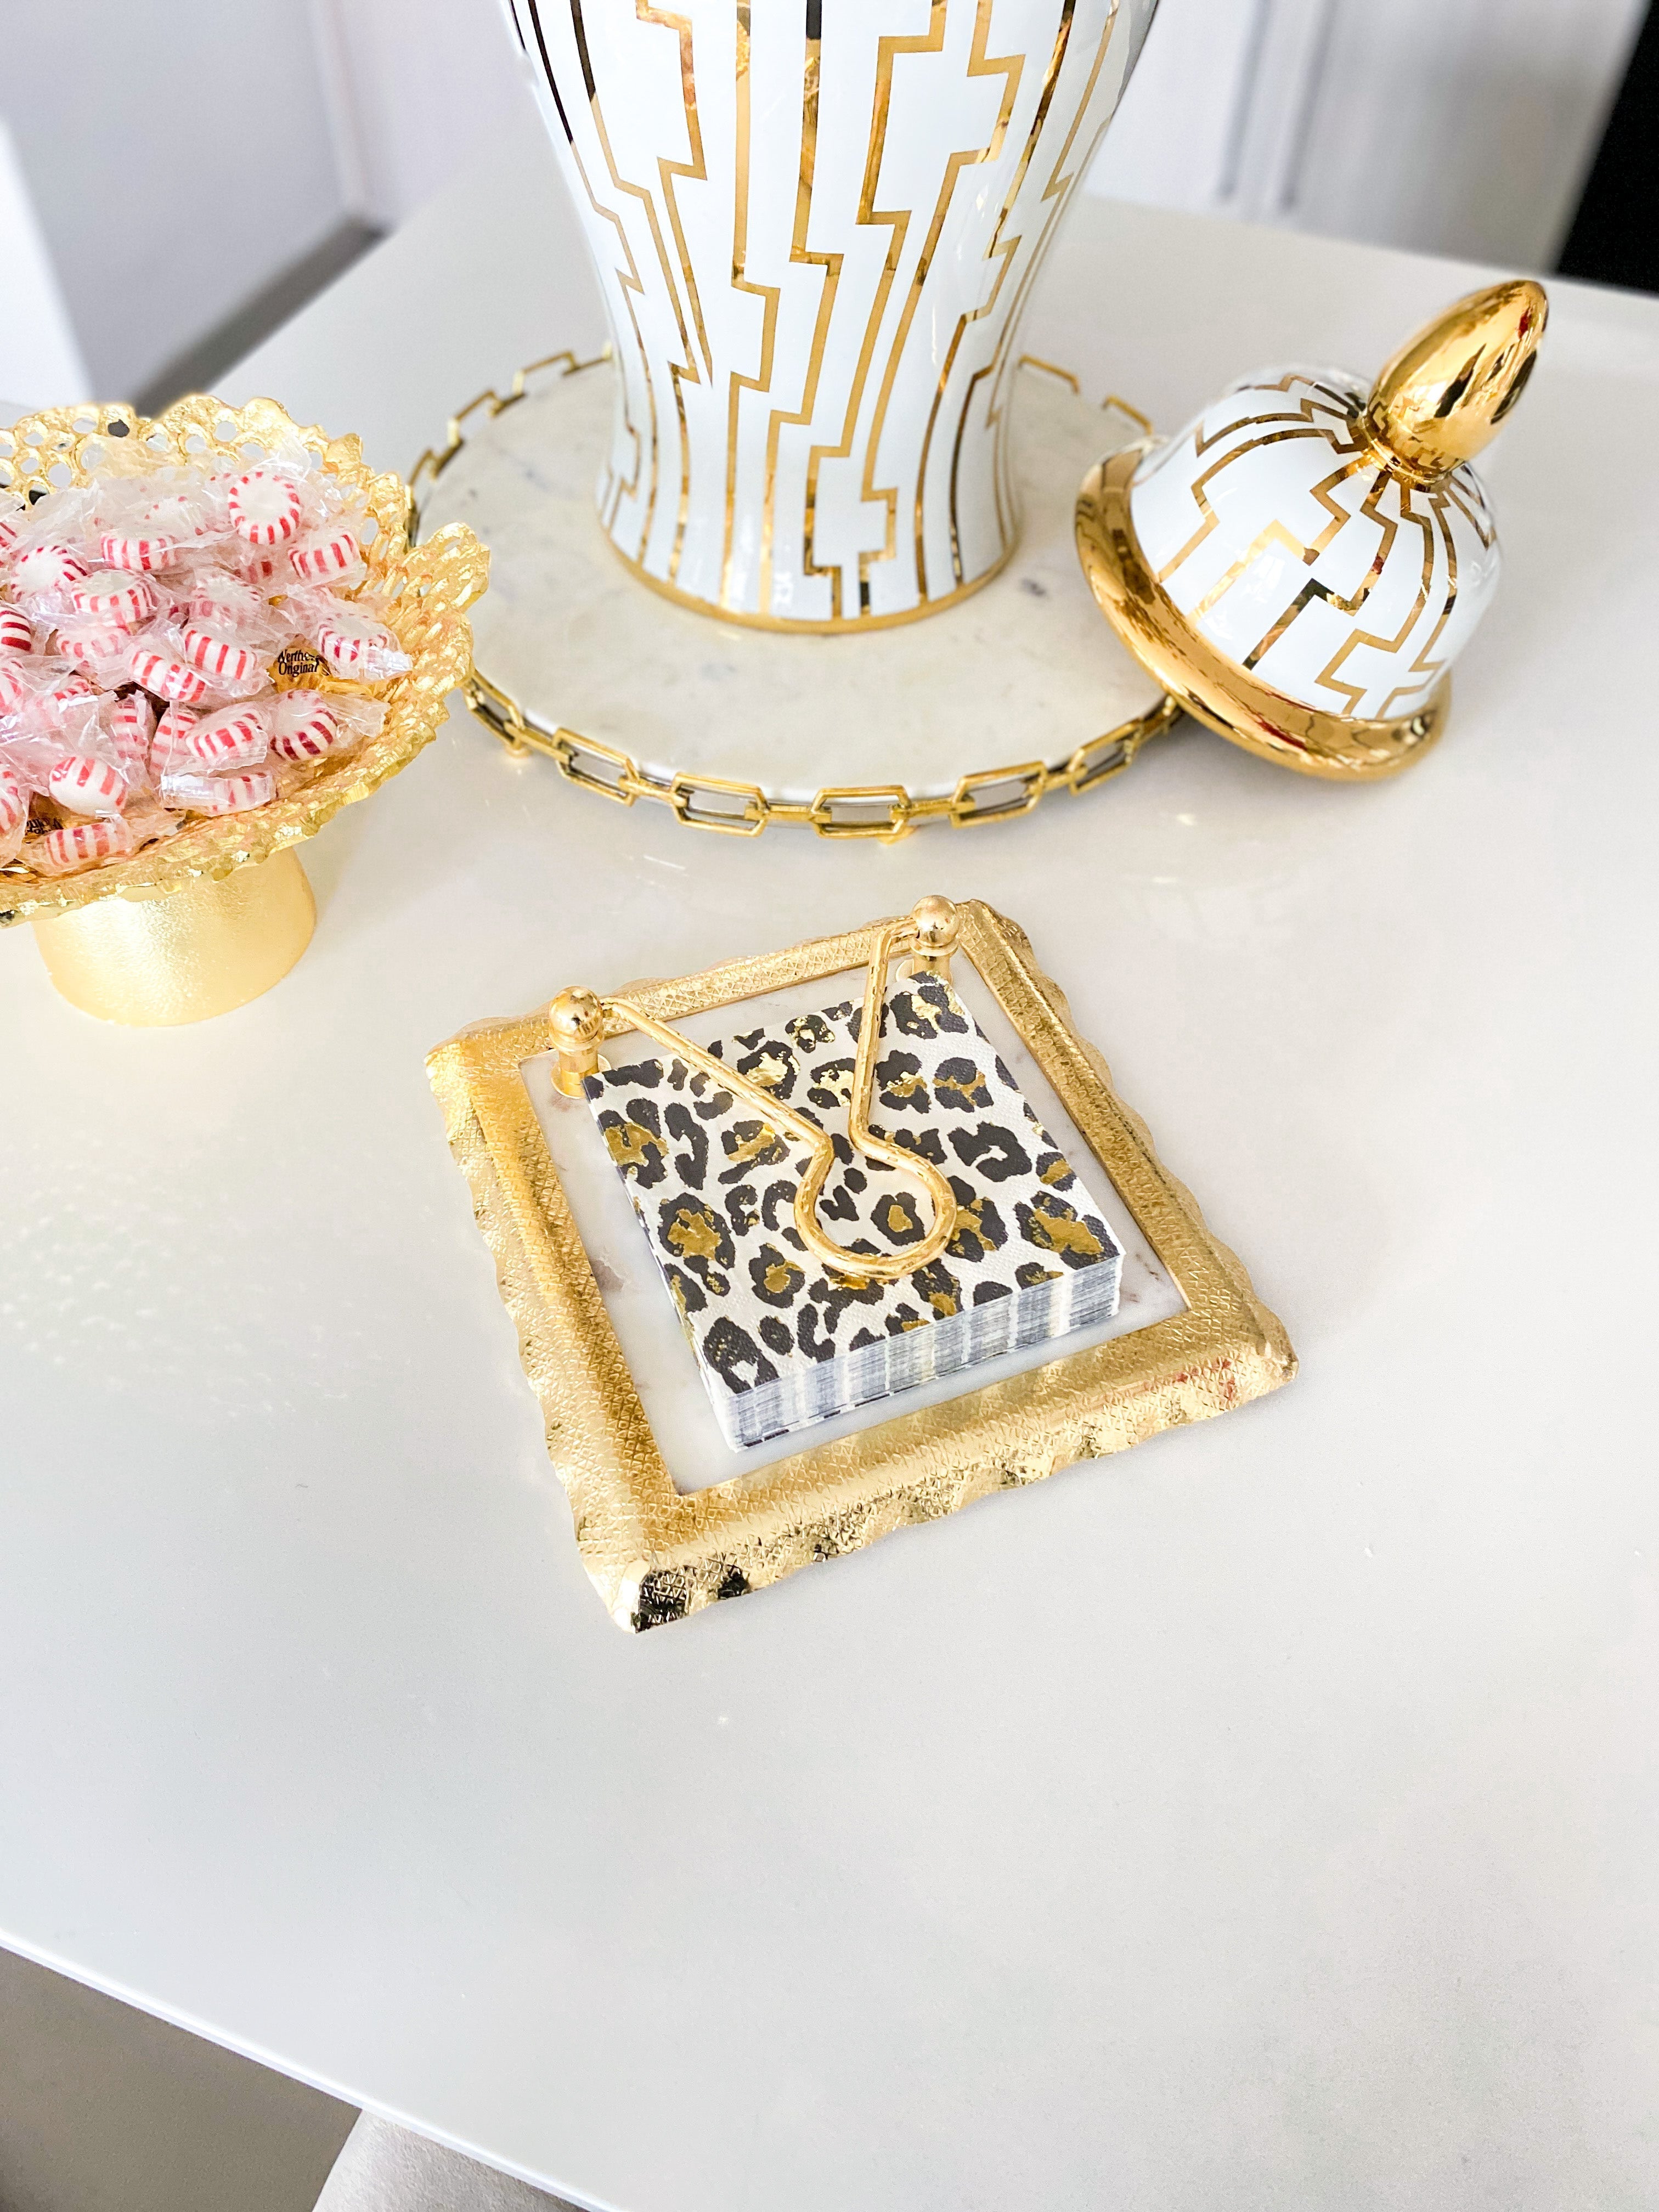 Marble Napkin Holder with Gold Details - HTS HOME DECOR